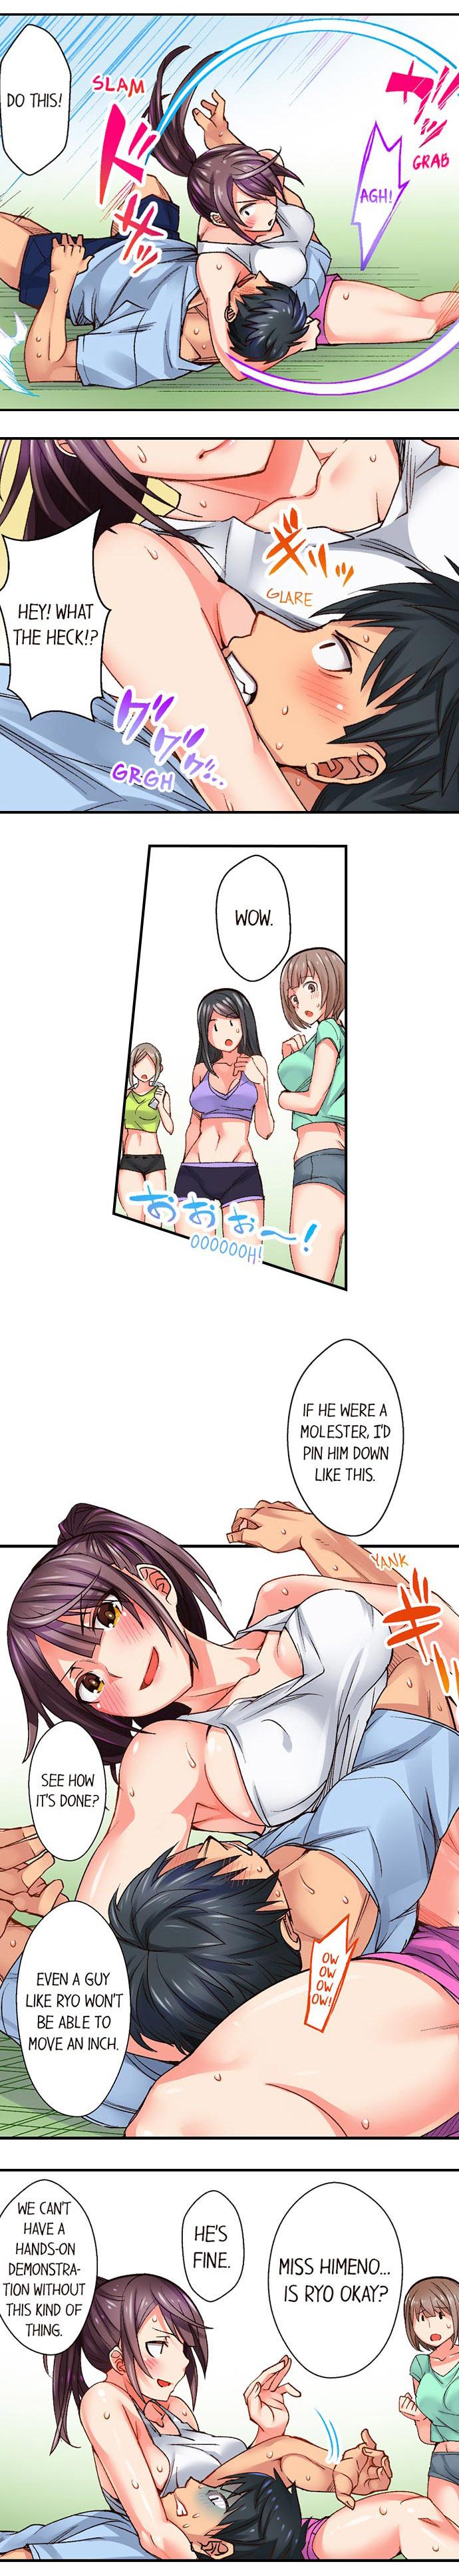 You Cum, You Lose! Wrestling with a Pervert Ch.2/? 8